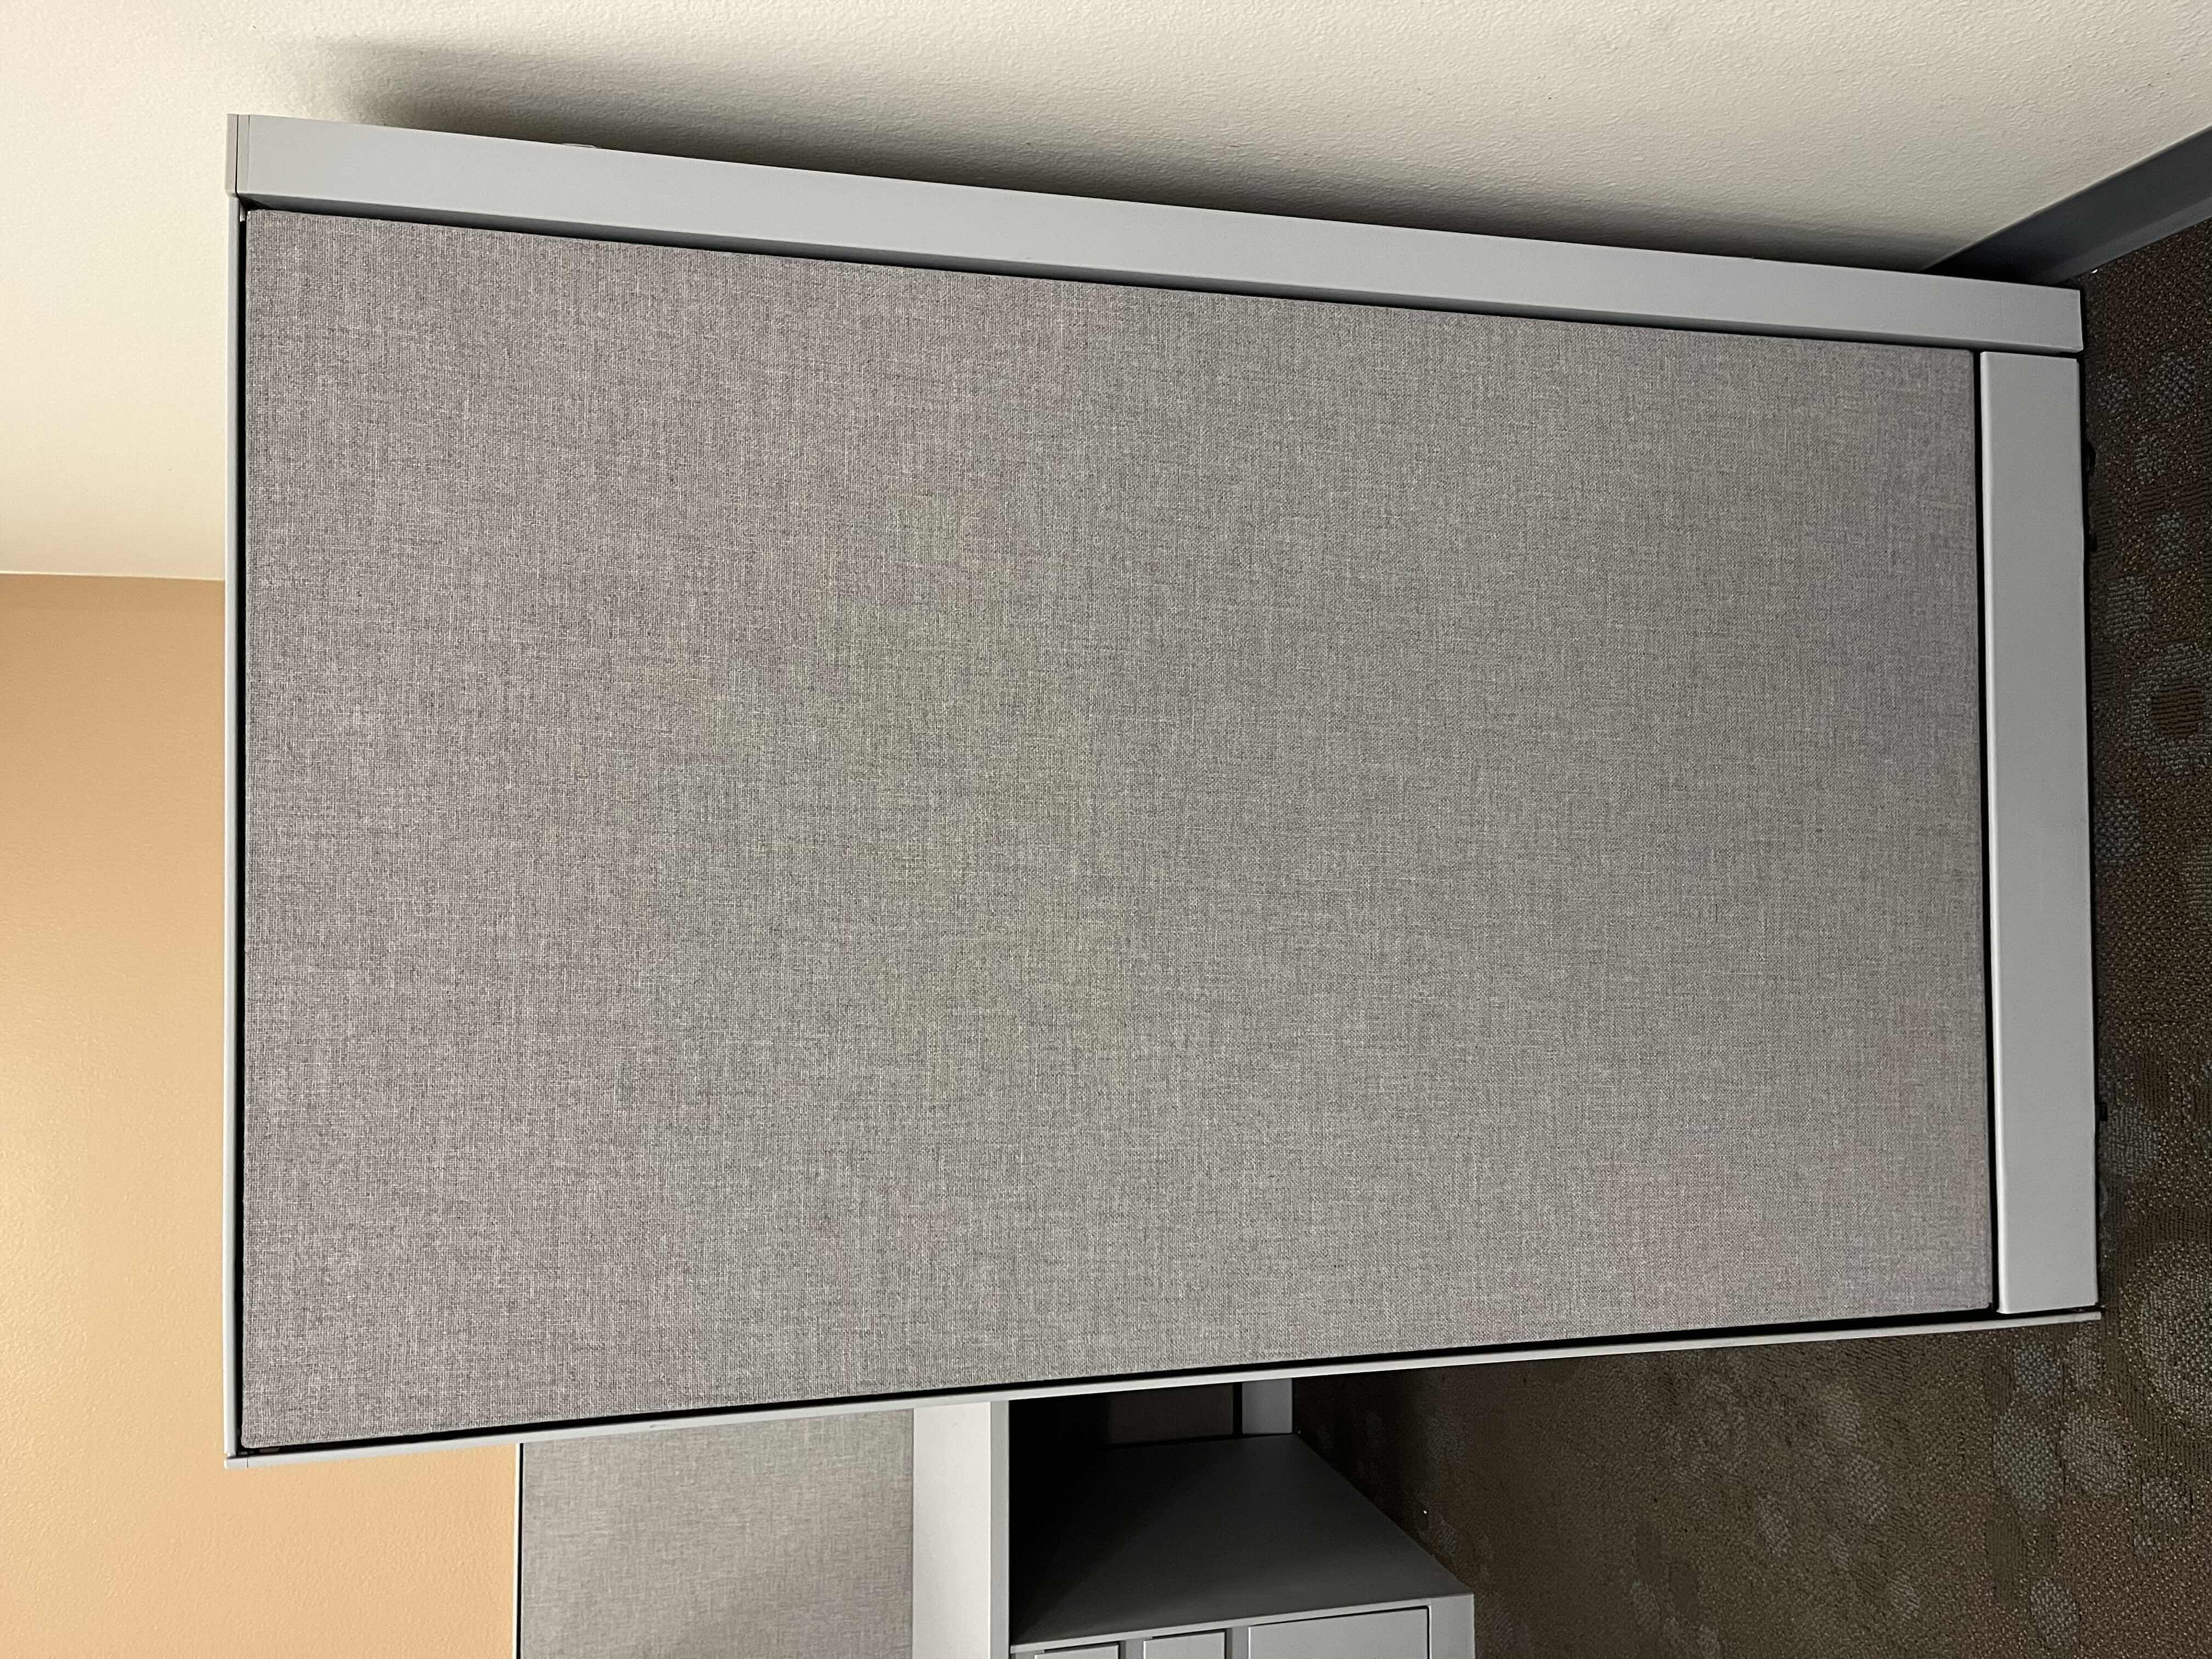 Photo 9 of STEELCASE BUILT IN CUBICLE L SHAPE 3 DRAWER OFFICE DESK 72” X 72” H27.5” W 4 CUBICLE PANELS 30.5”-42” X 54”